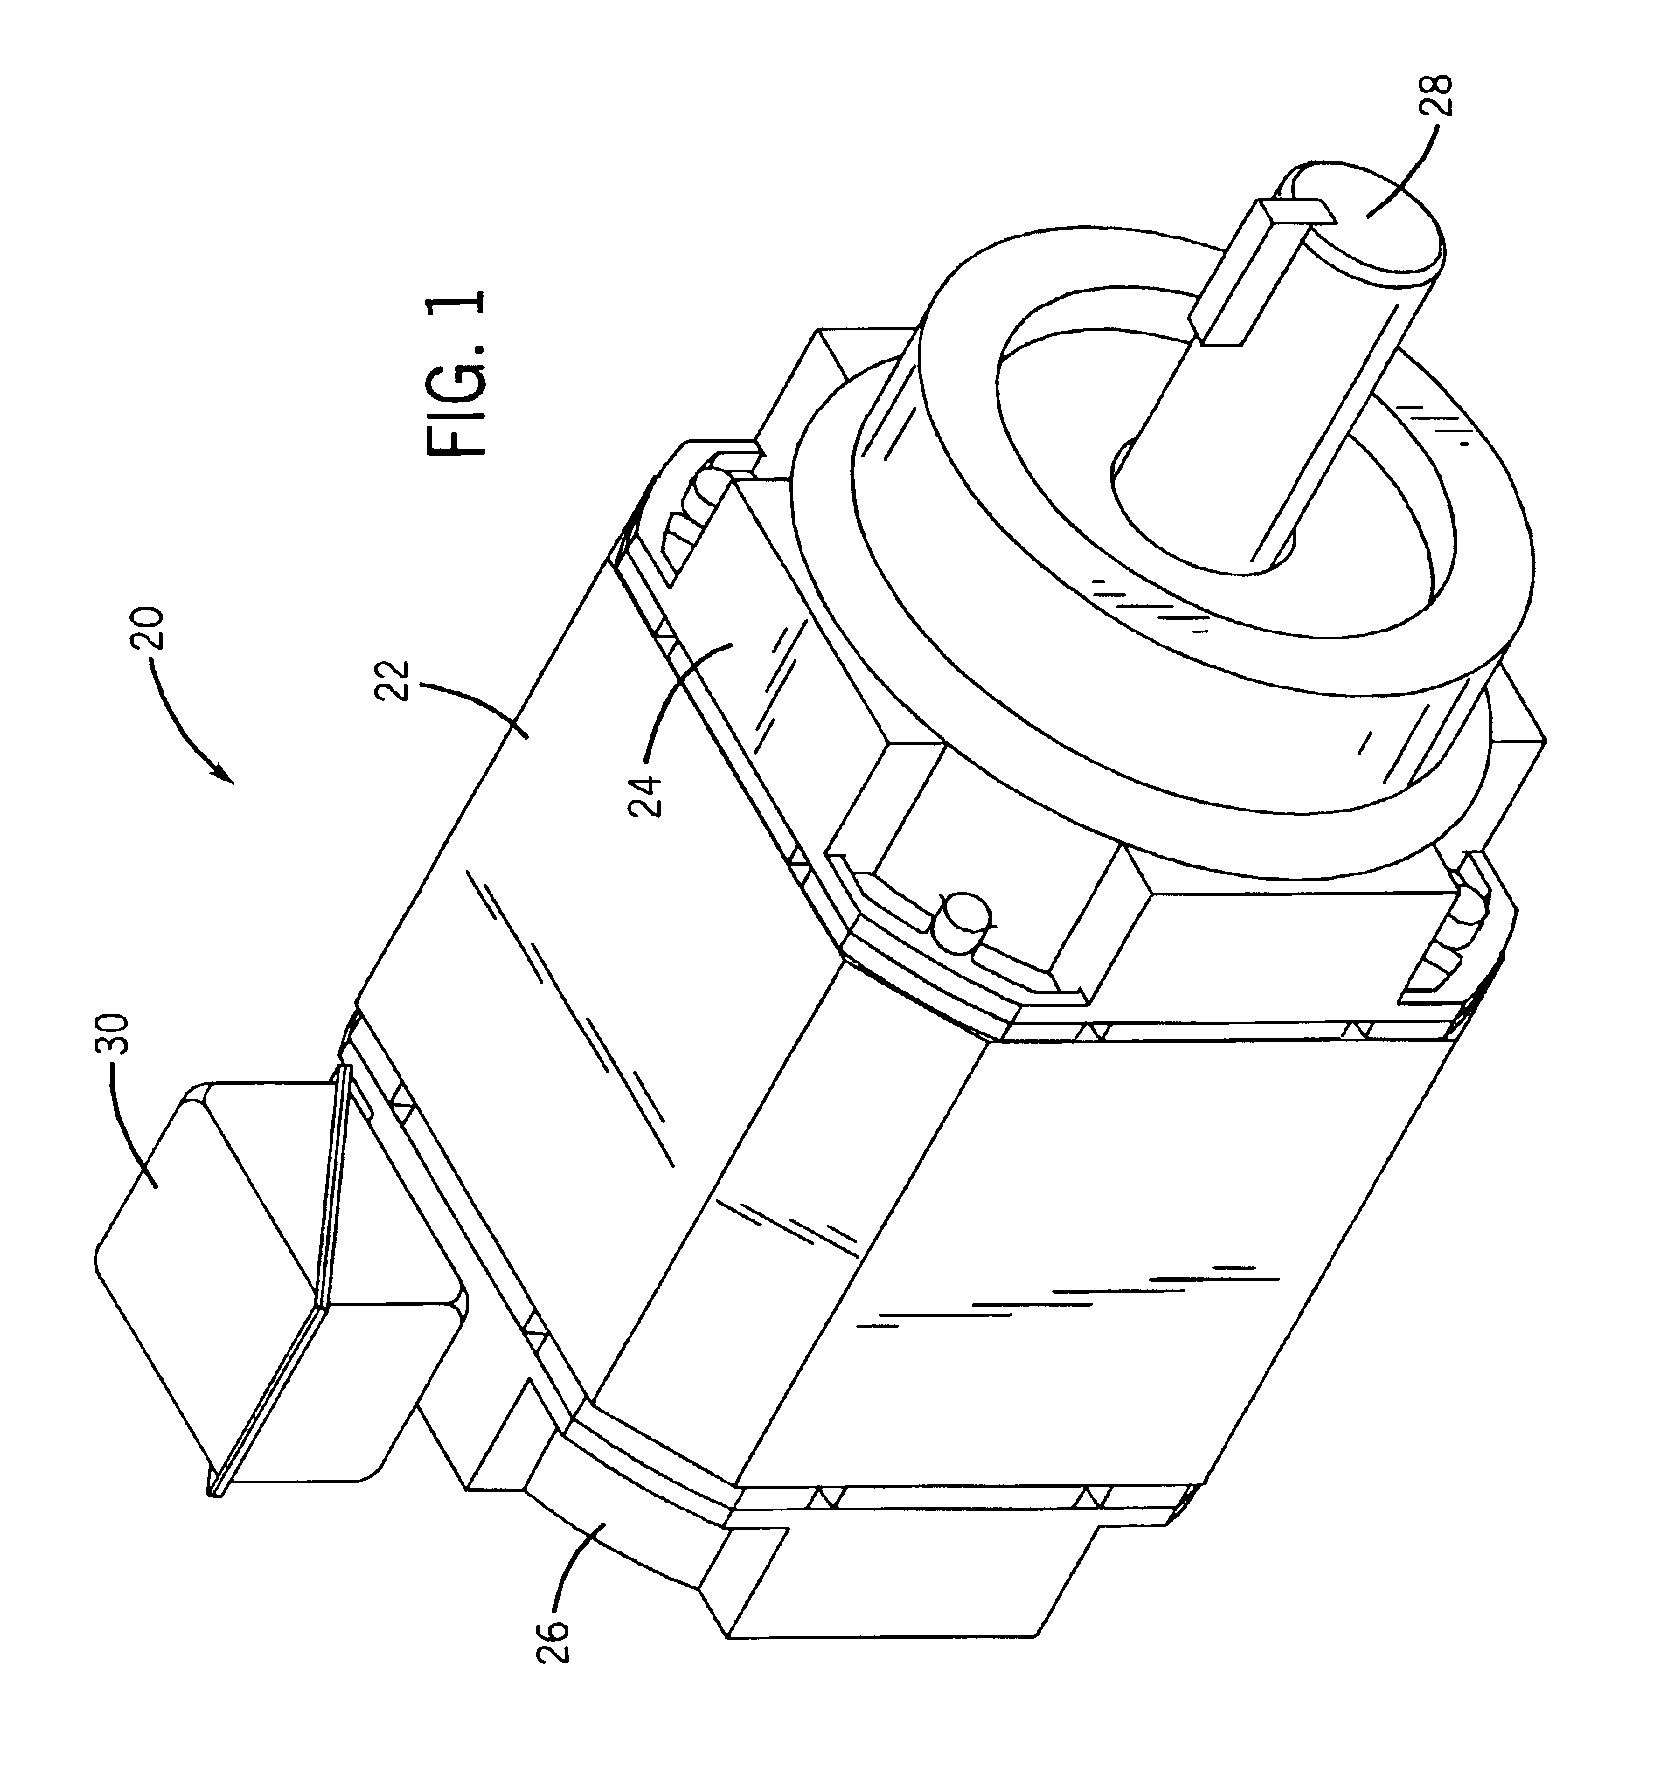 Electric apparatus having a stator with insulated end laminations within the central opening of end plates